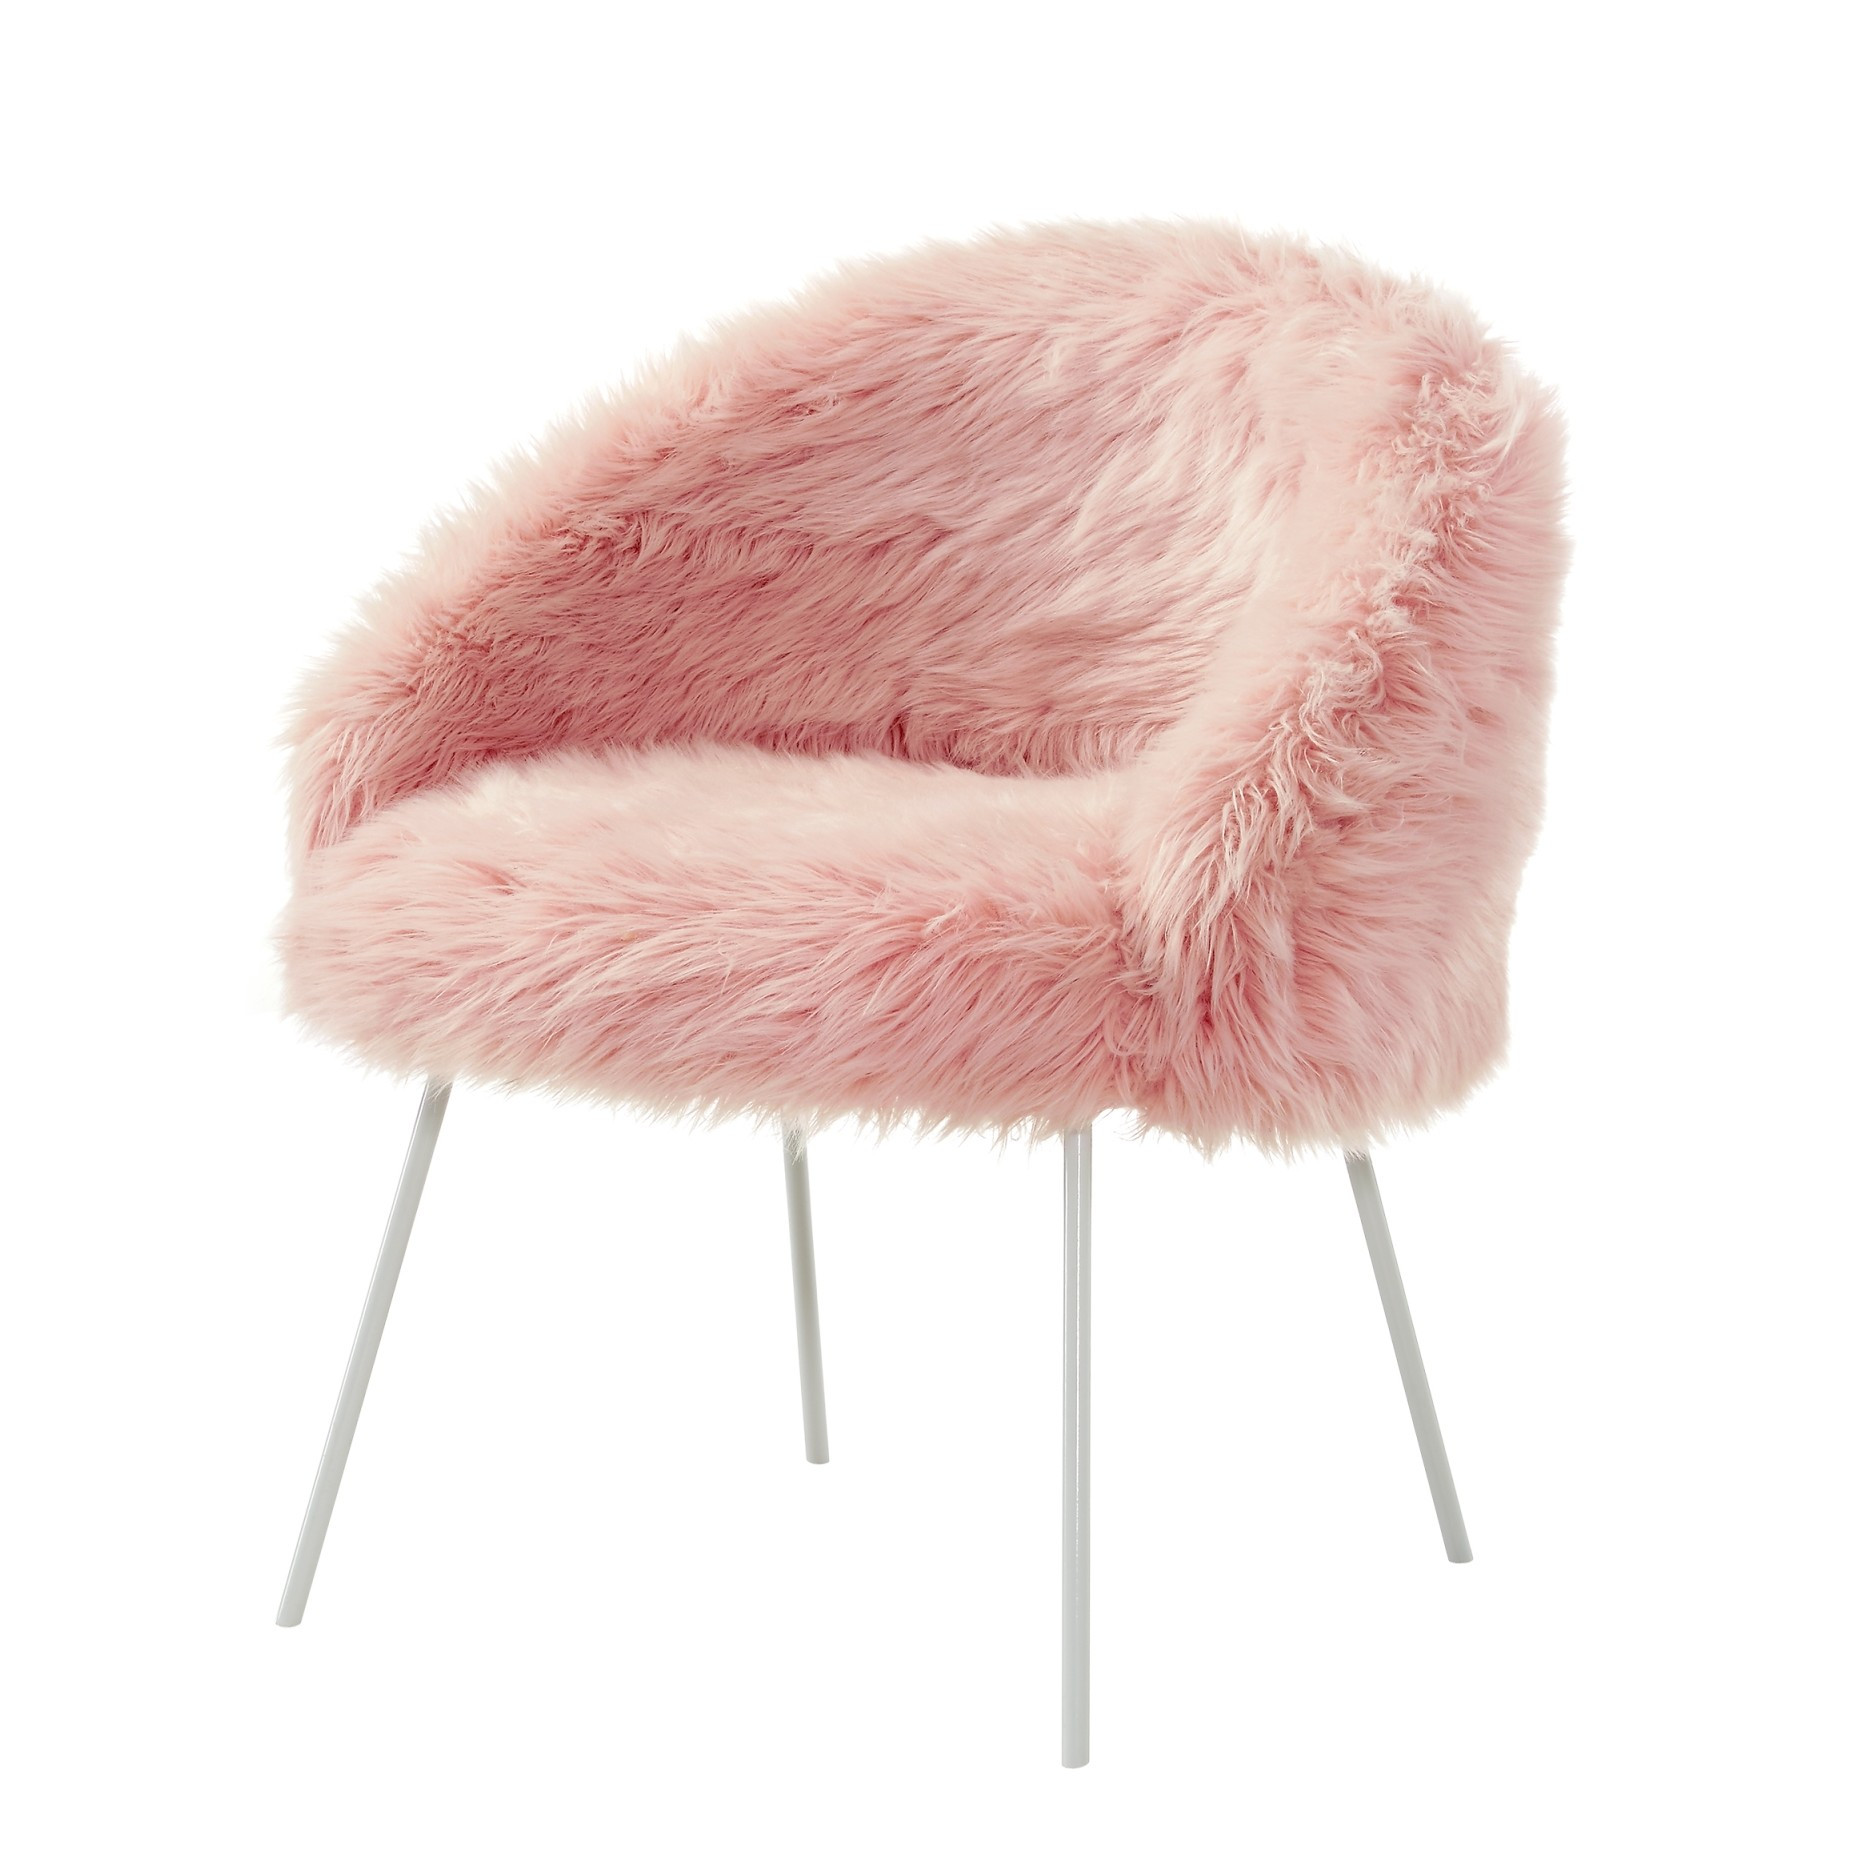 28" Rose And White Faux Fur Arm Chair-533846-1